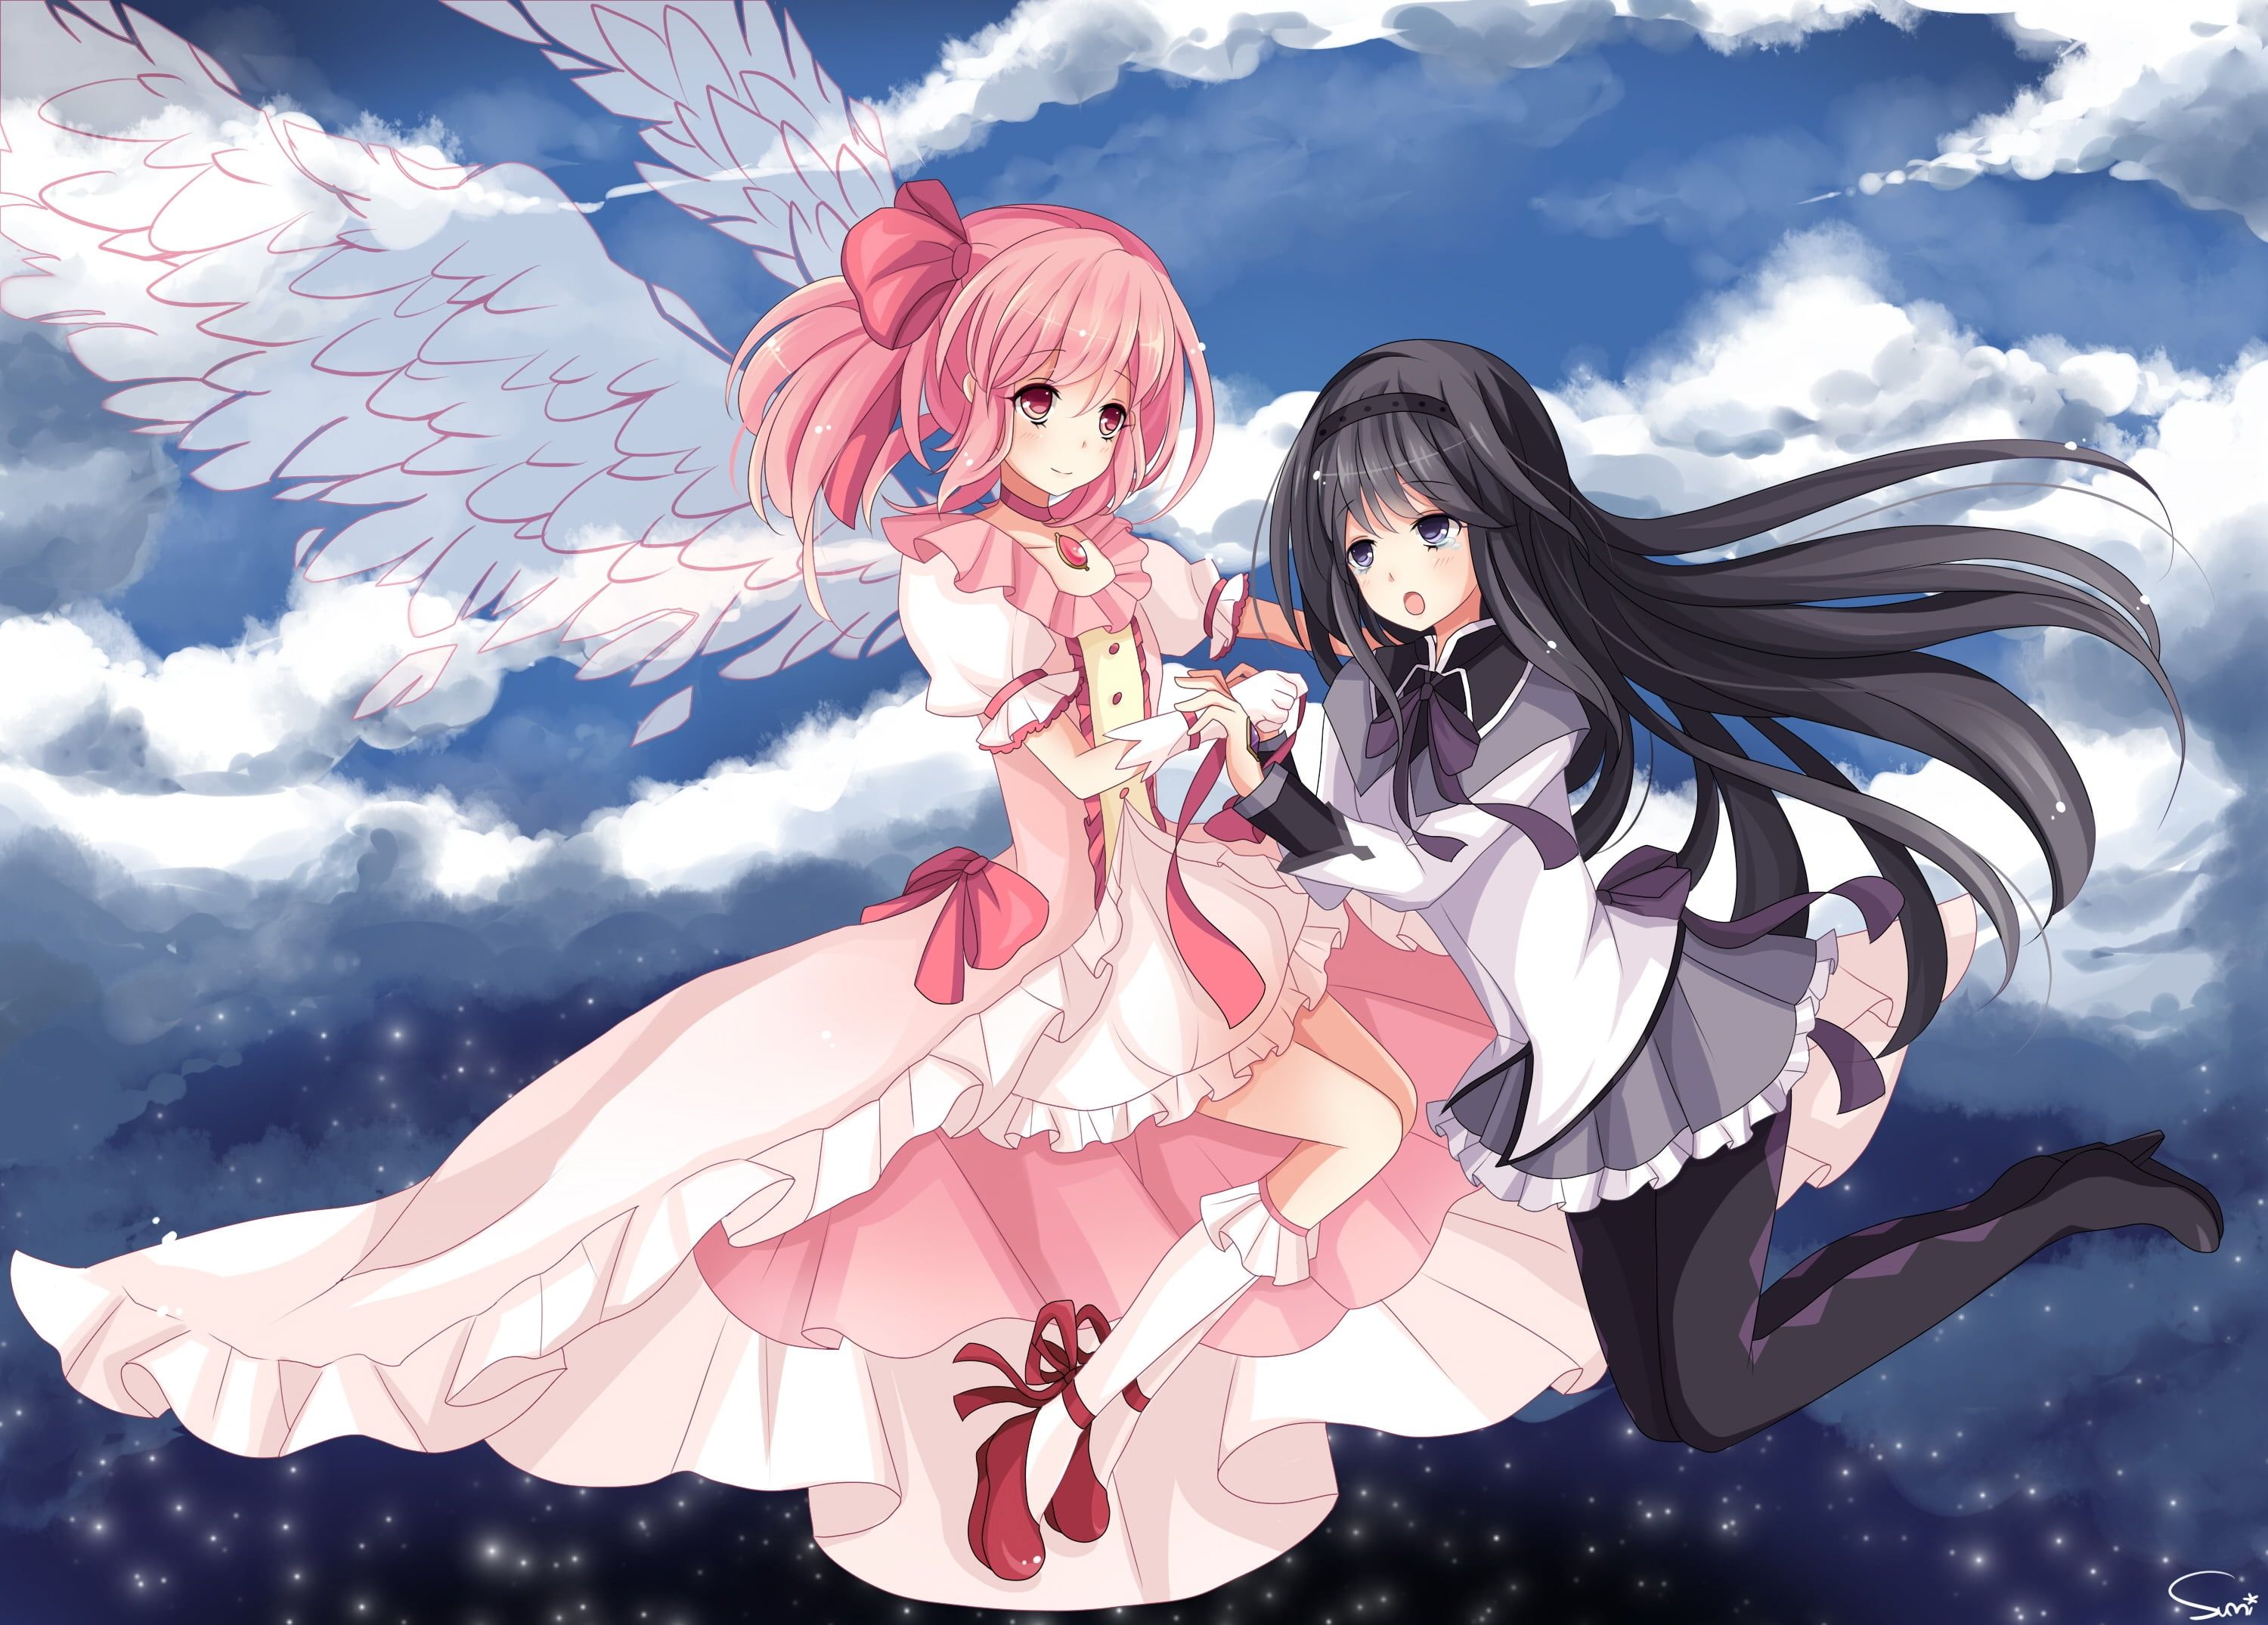  Anime  Two  Girls  Wallpapers Wallpaper Cave